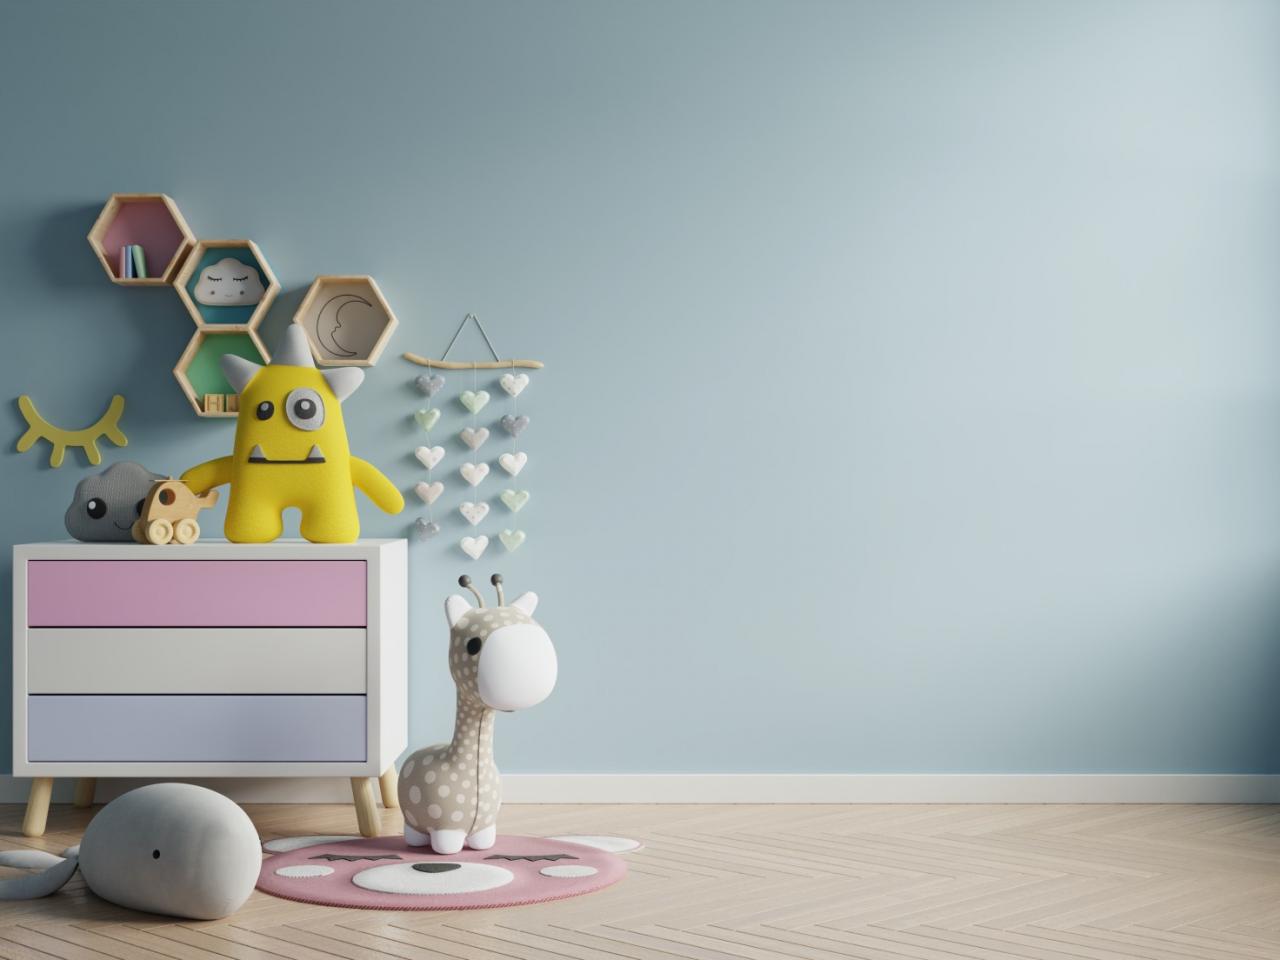 Kids’ room: don't miss these decorations!